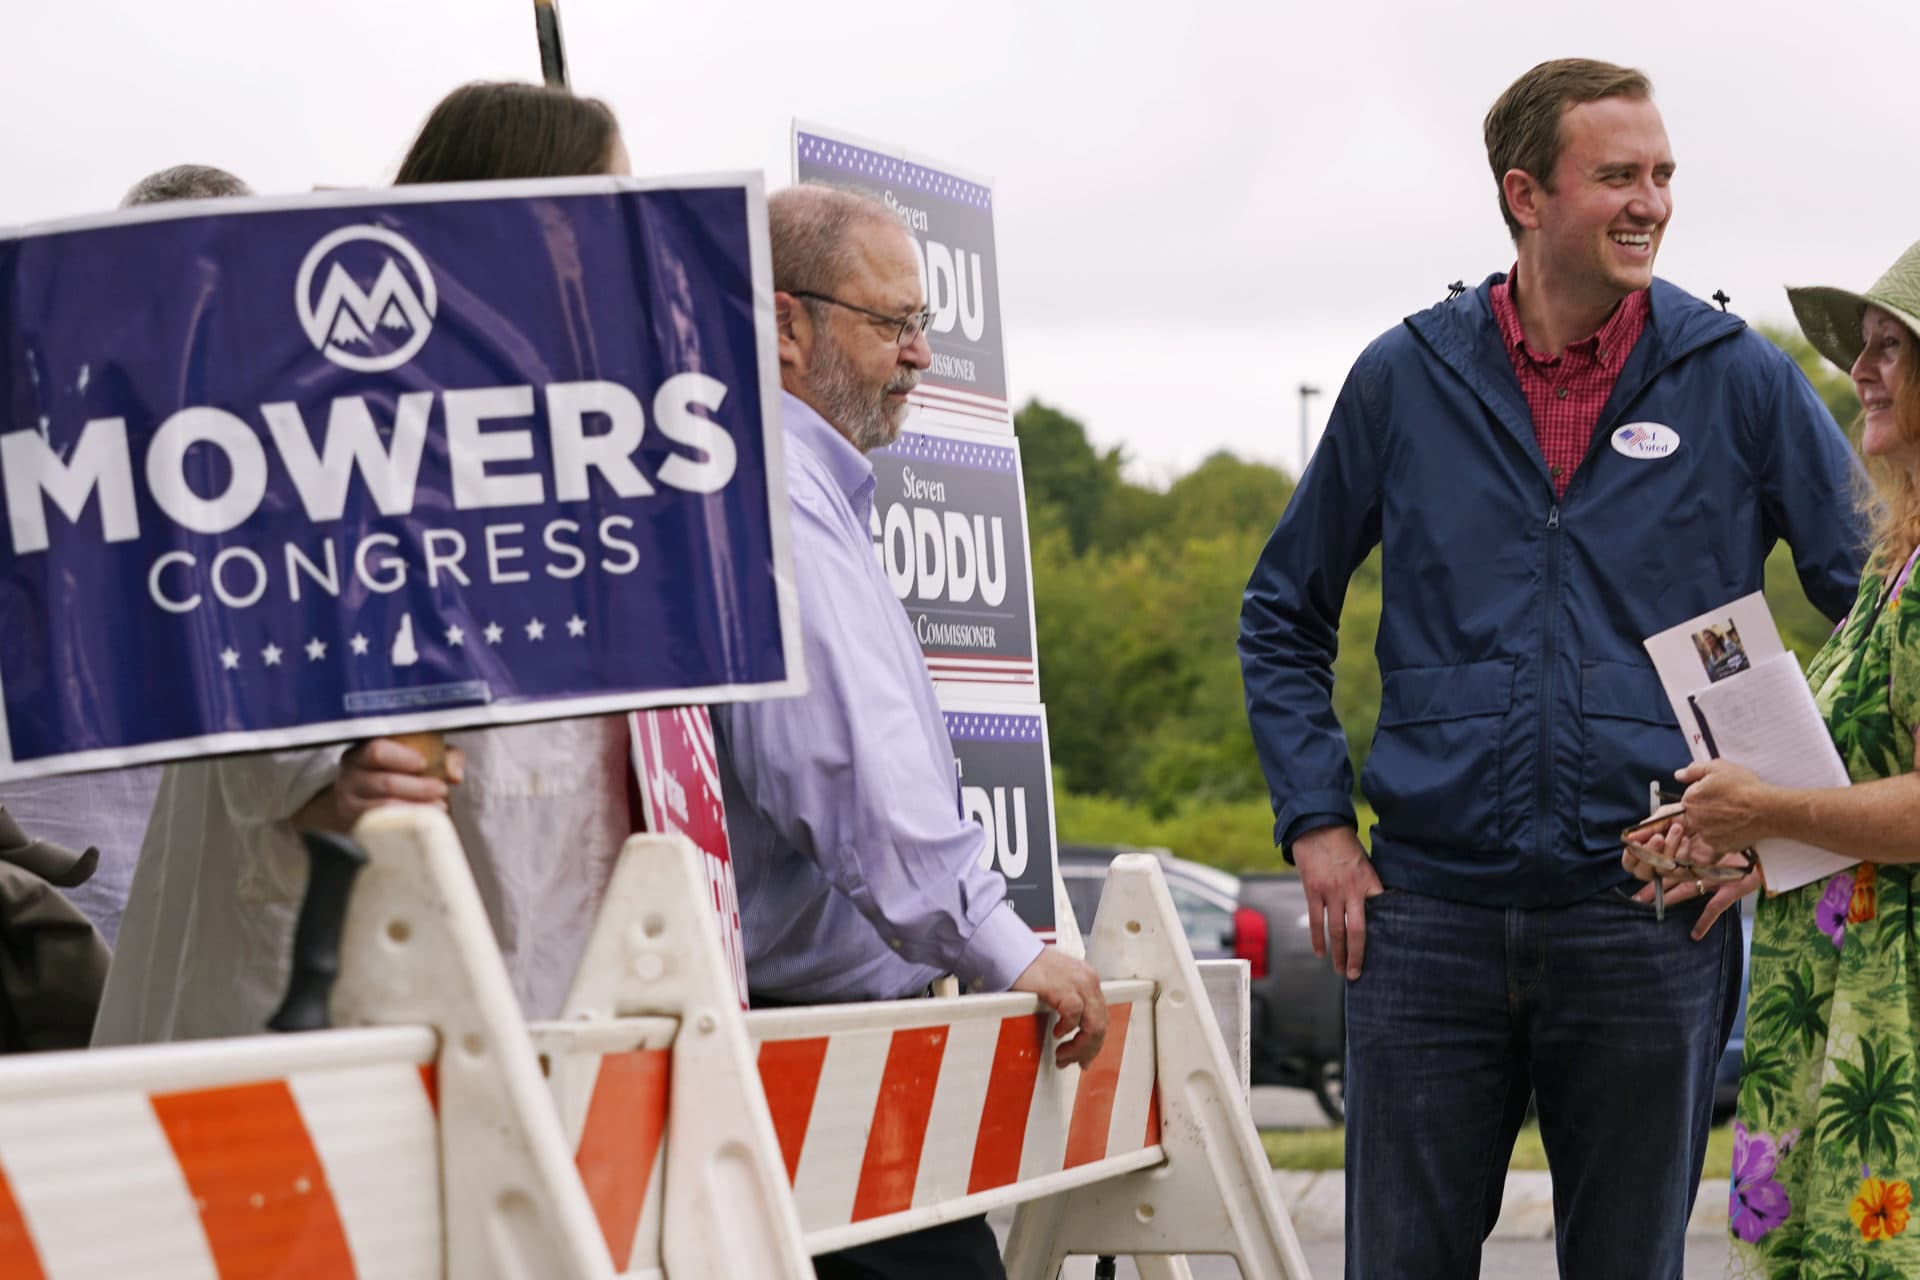 New Hampshire Republican 1st Congressional District Candidate Matt Mowers smiles while waiting to greet voters, Sept. 13, 2022, during a campaign stop at a polling station in Derry, N.H. (Charles Krupa/AP)